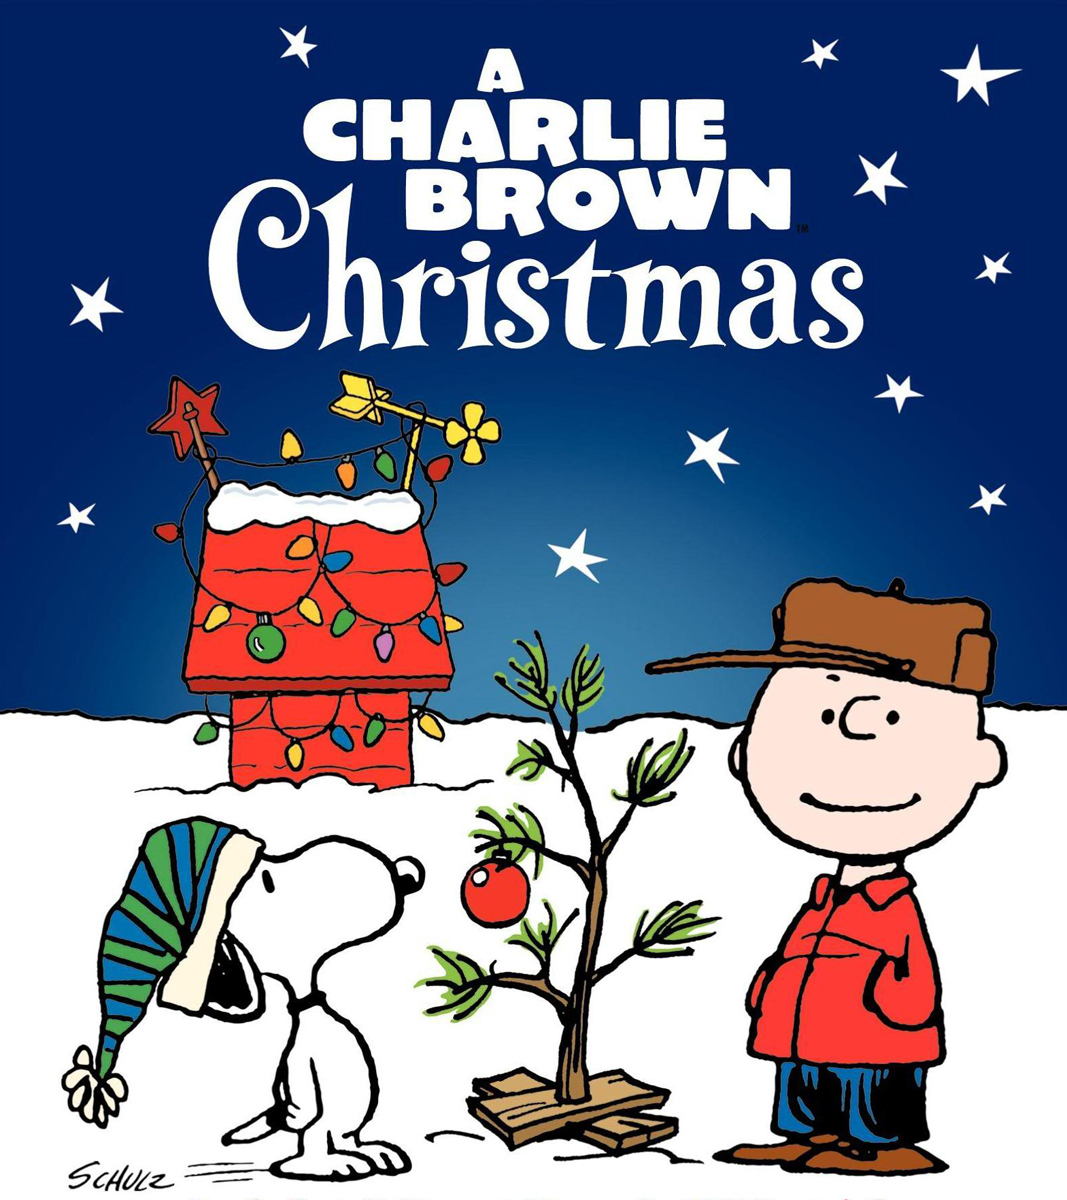 A Charlie Brown Christmas This is for those who are kids have kids or are still a kid at heart Morning afternoon or night this cartoon movie will